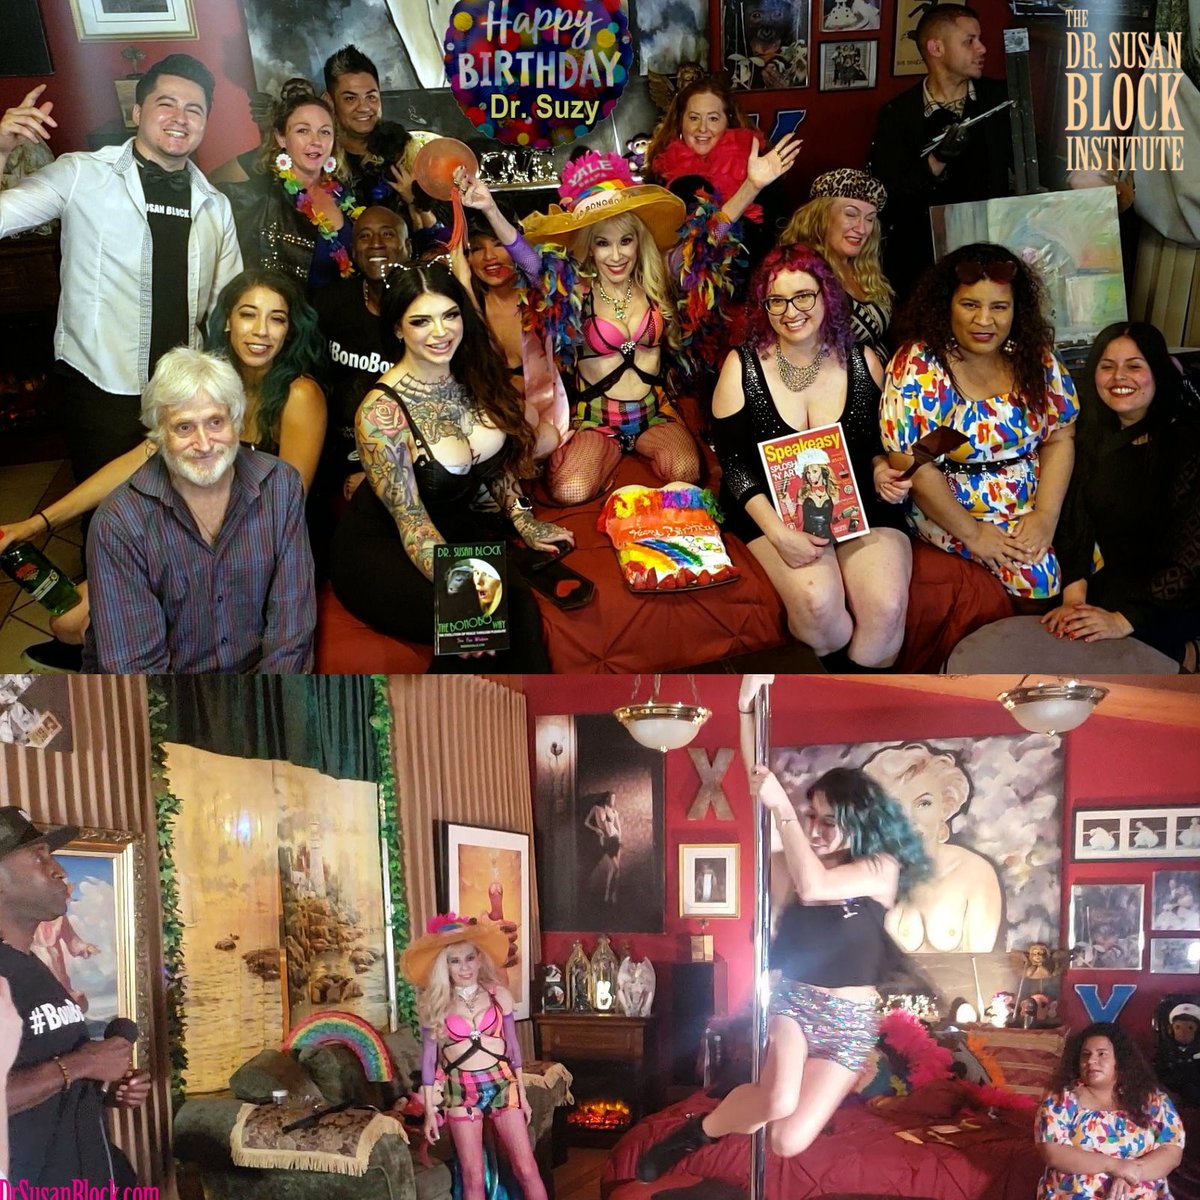 #Birthdays can be hazardous to your #MentalHealth🤪 but THiS One was a Megaton of Fun💃🏽 Thx to All My Guests for making it a #ProBonobo #BirthdaySpanking-Hot #CondomBalloon-BJ #BirthdayPride Special🎈 Check it out on #FDR (#FuckDaRich)😻 +More Fun Pics: drsusanblock.com/birthday-2023 🌈